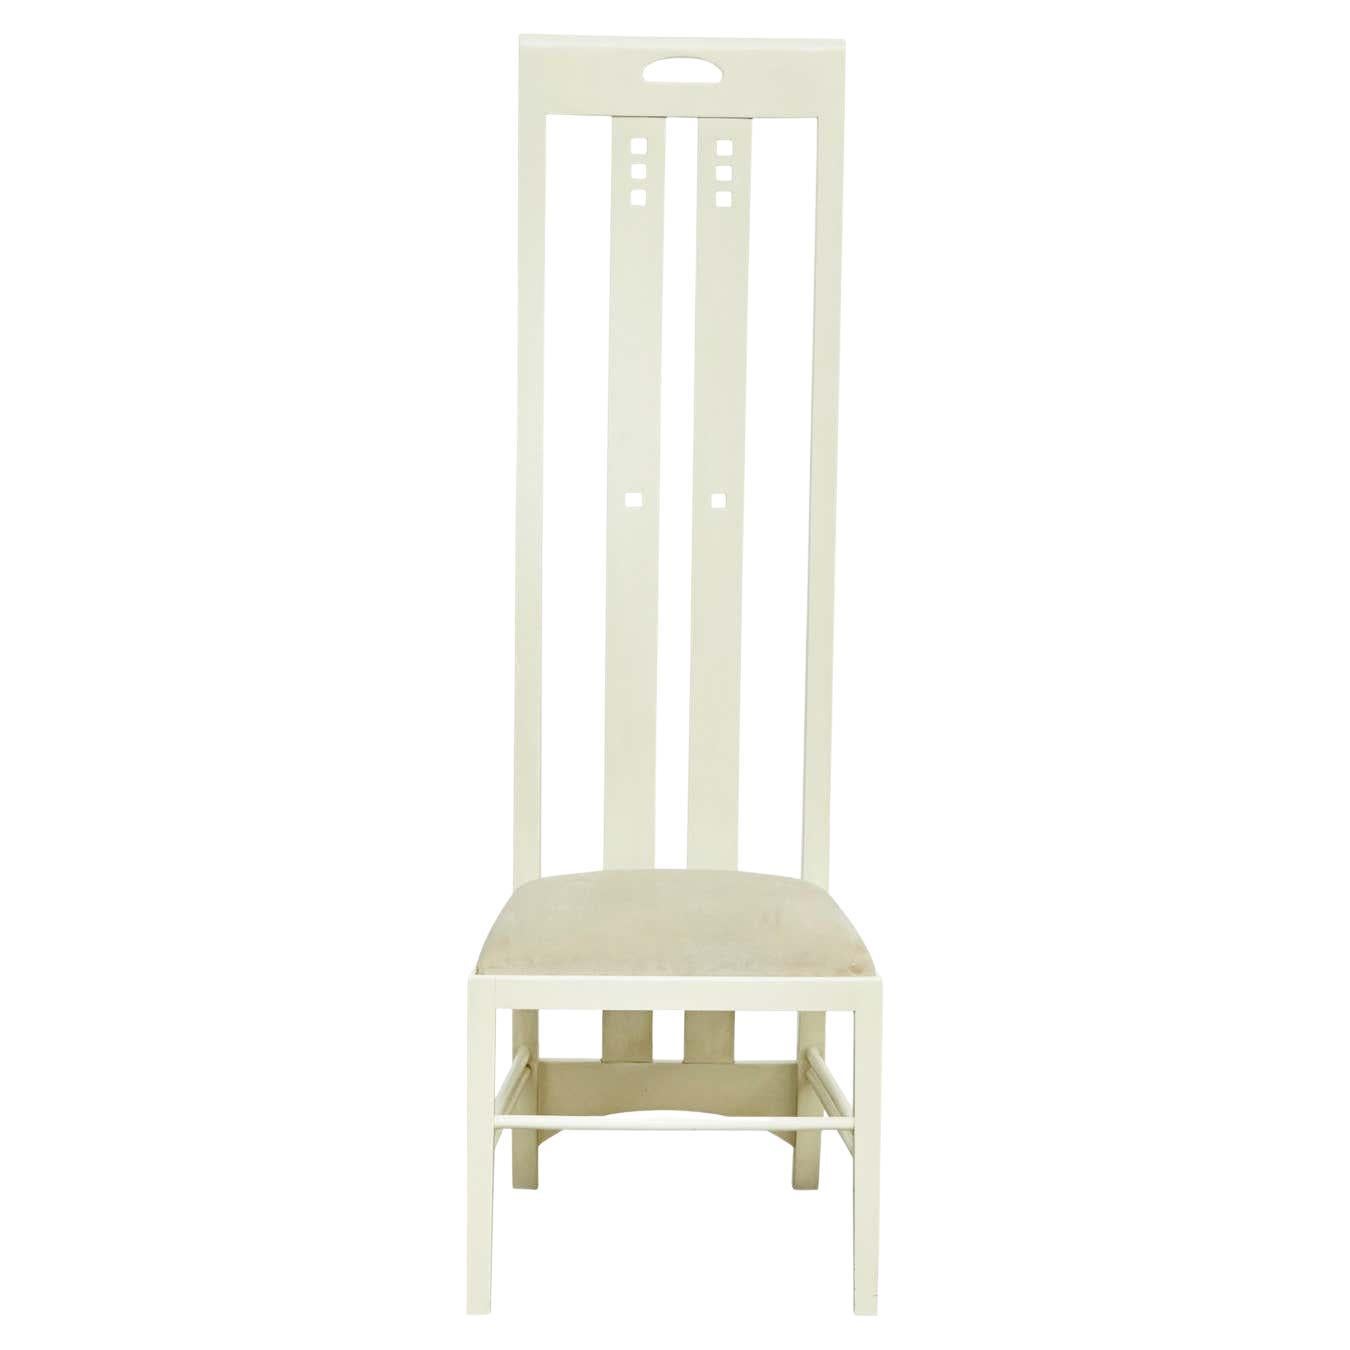 Chair designed by Charles Rennie Mackintosh, circa 1940.
By unknown manufacturer, circa 1970.

In original condition, with minor wear consistent with age and use, preserving a beautiful patina.

Material
White lacquered solid